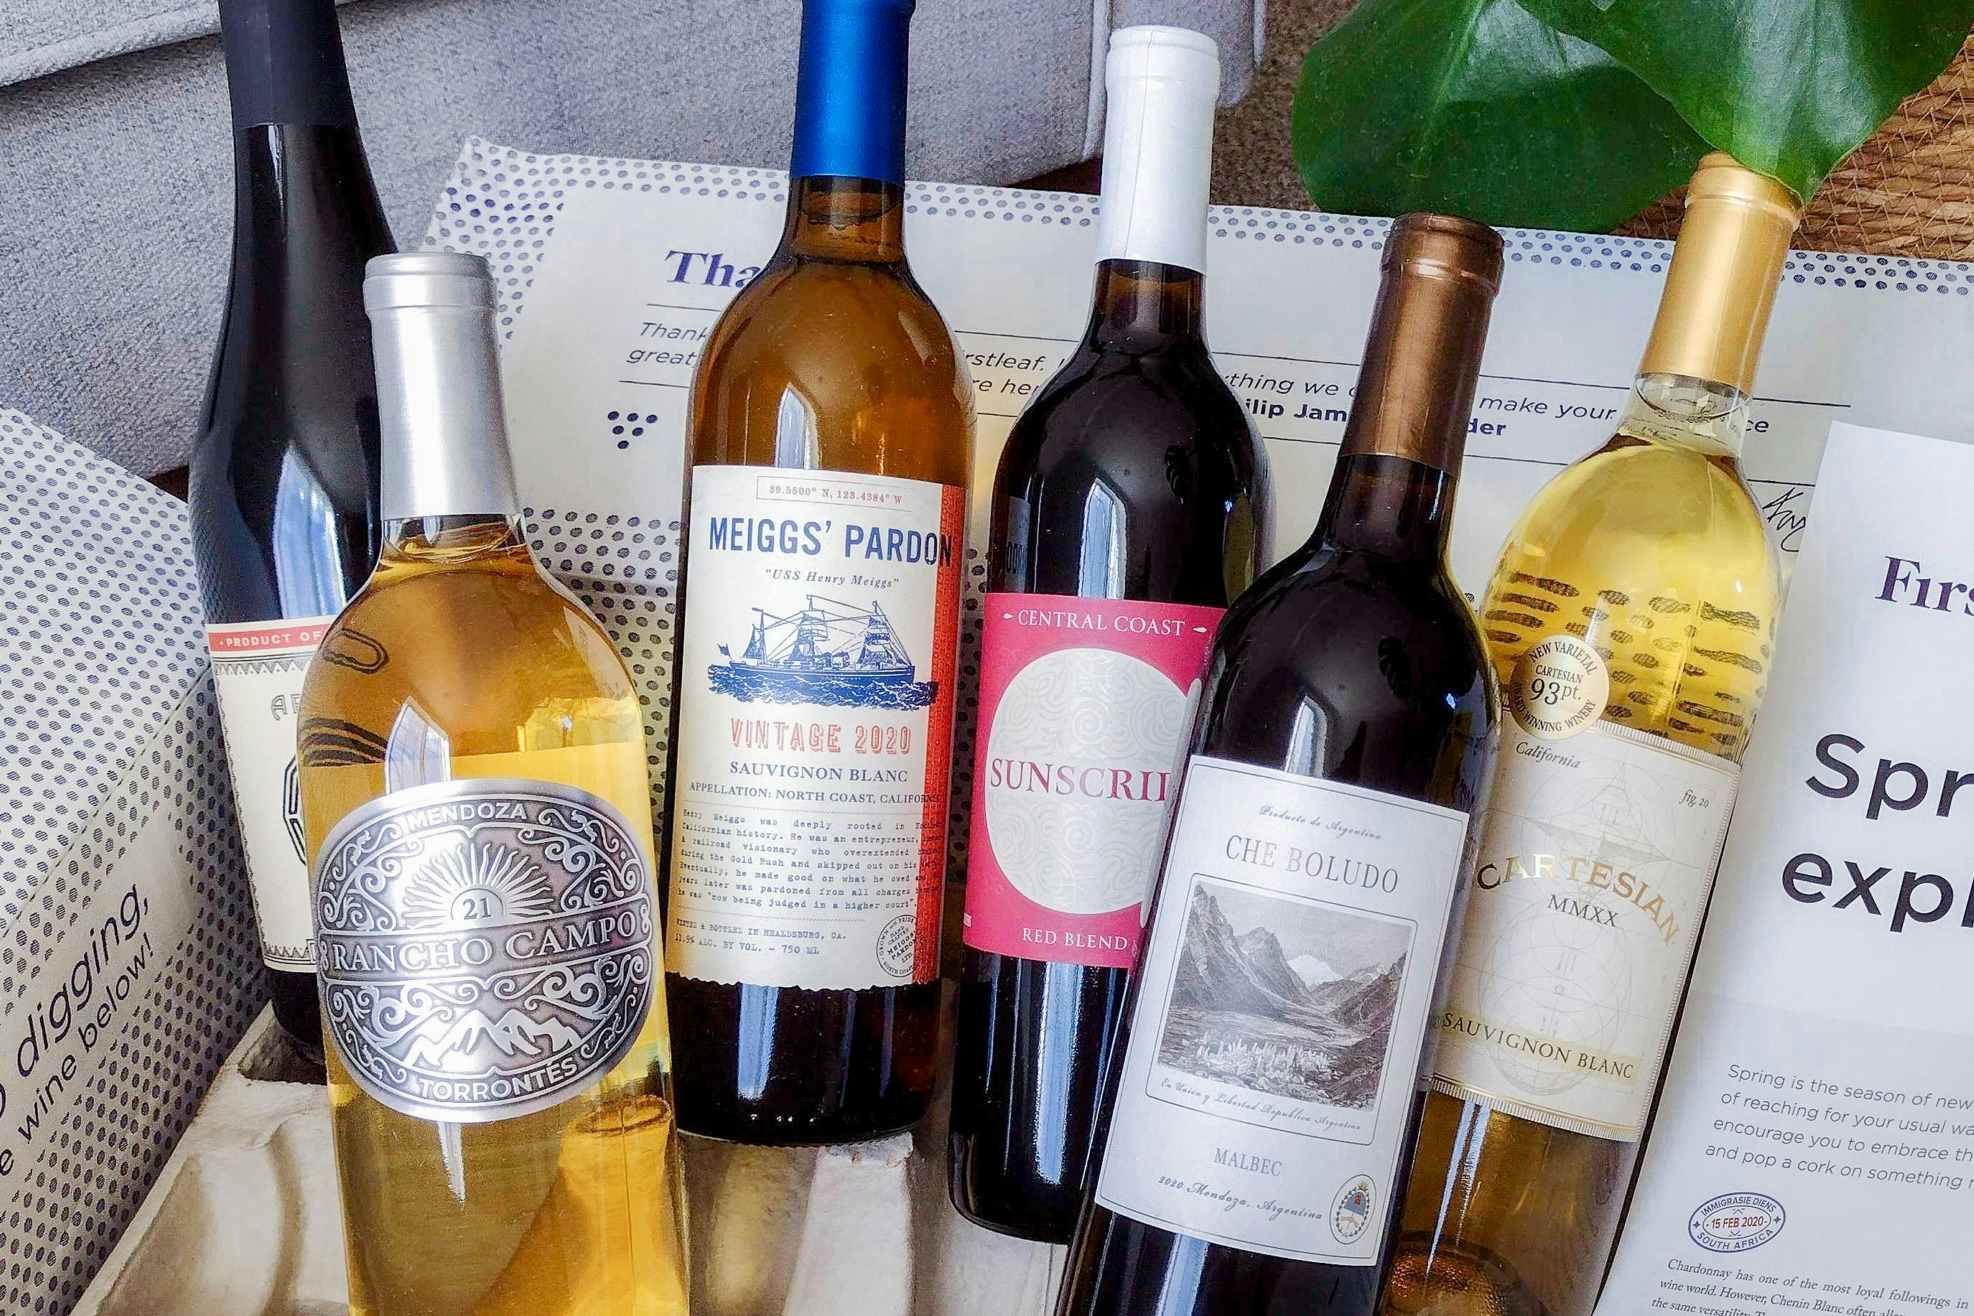 Get 6 Bottles of Wine for $29.95 Shipped ($4.99 Each)